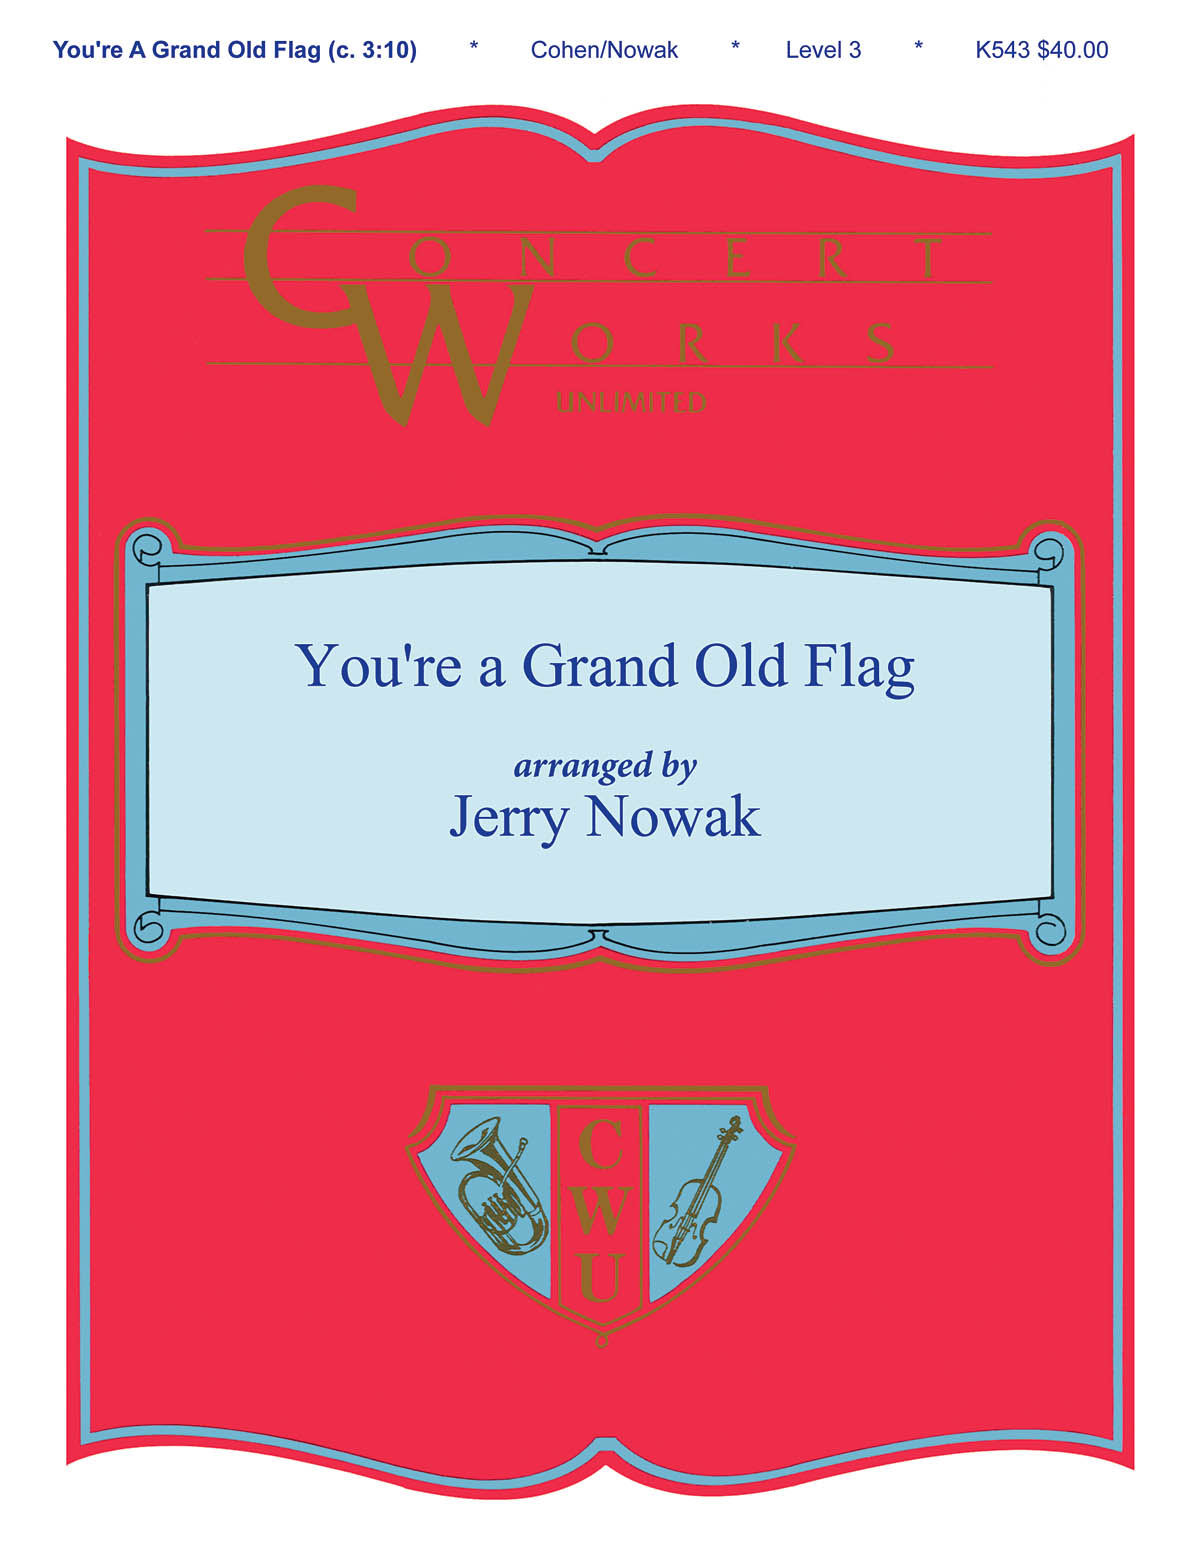 You’re a Grand Old Flag